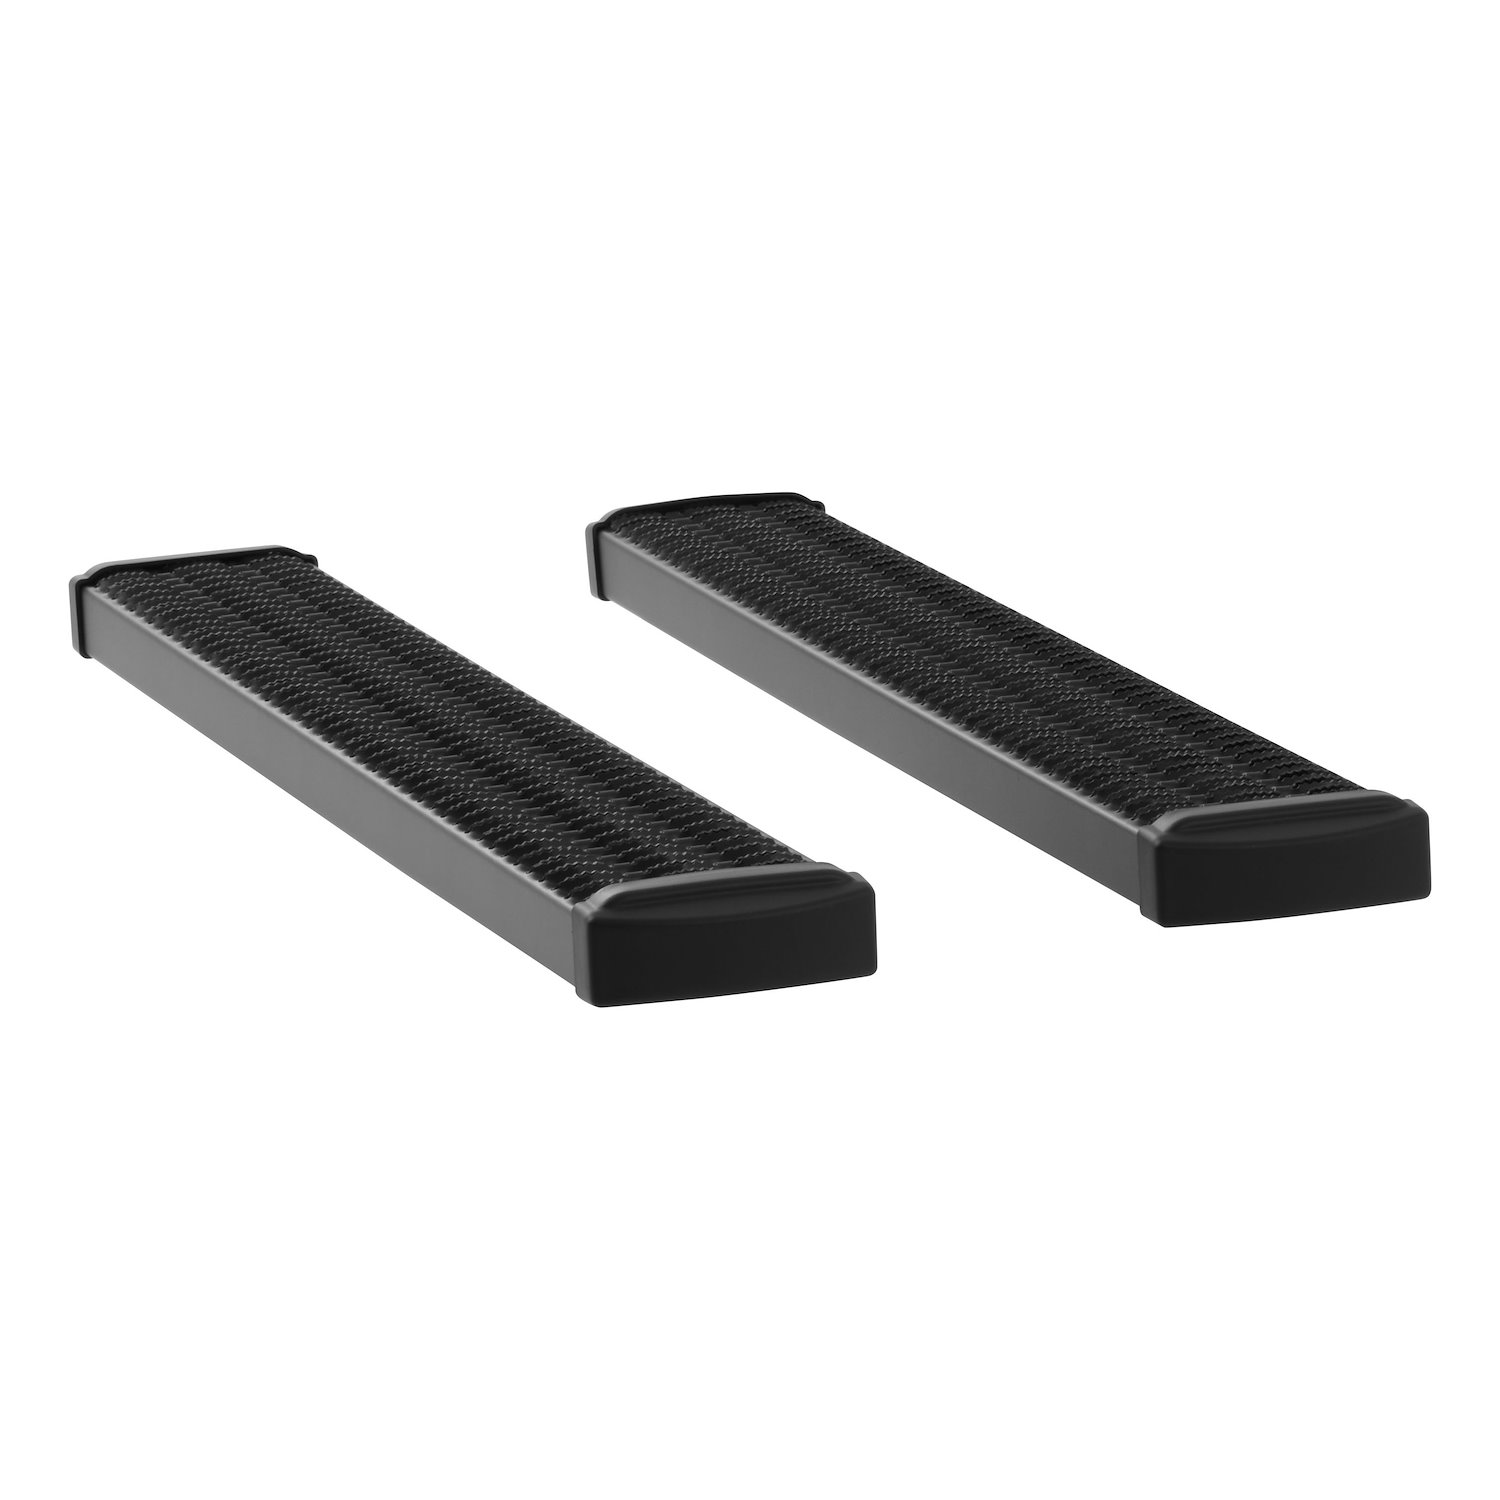 415054-400711 Grip Step 7 in. x 54 in. Black Aluminum Running Boards Fits Select Chevy Silverado, GMC Sierra